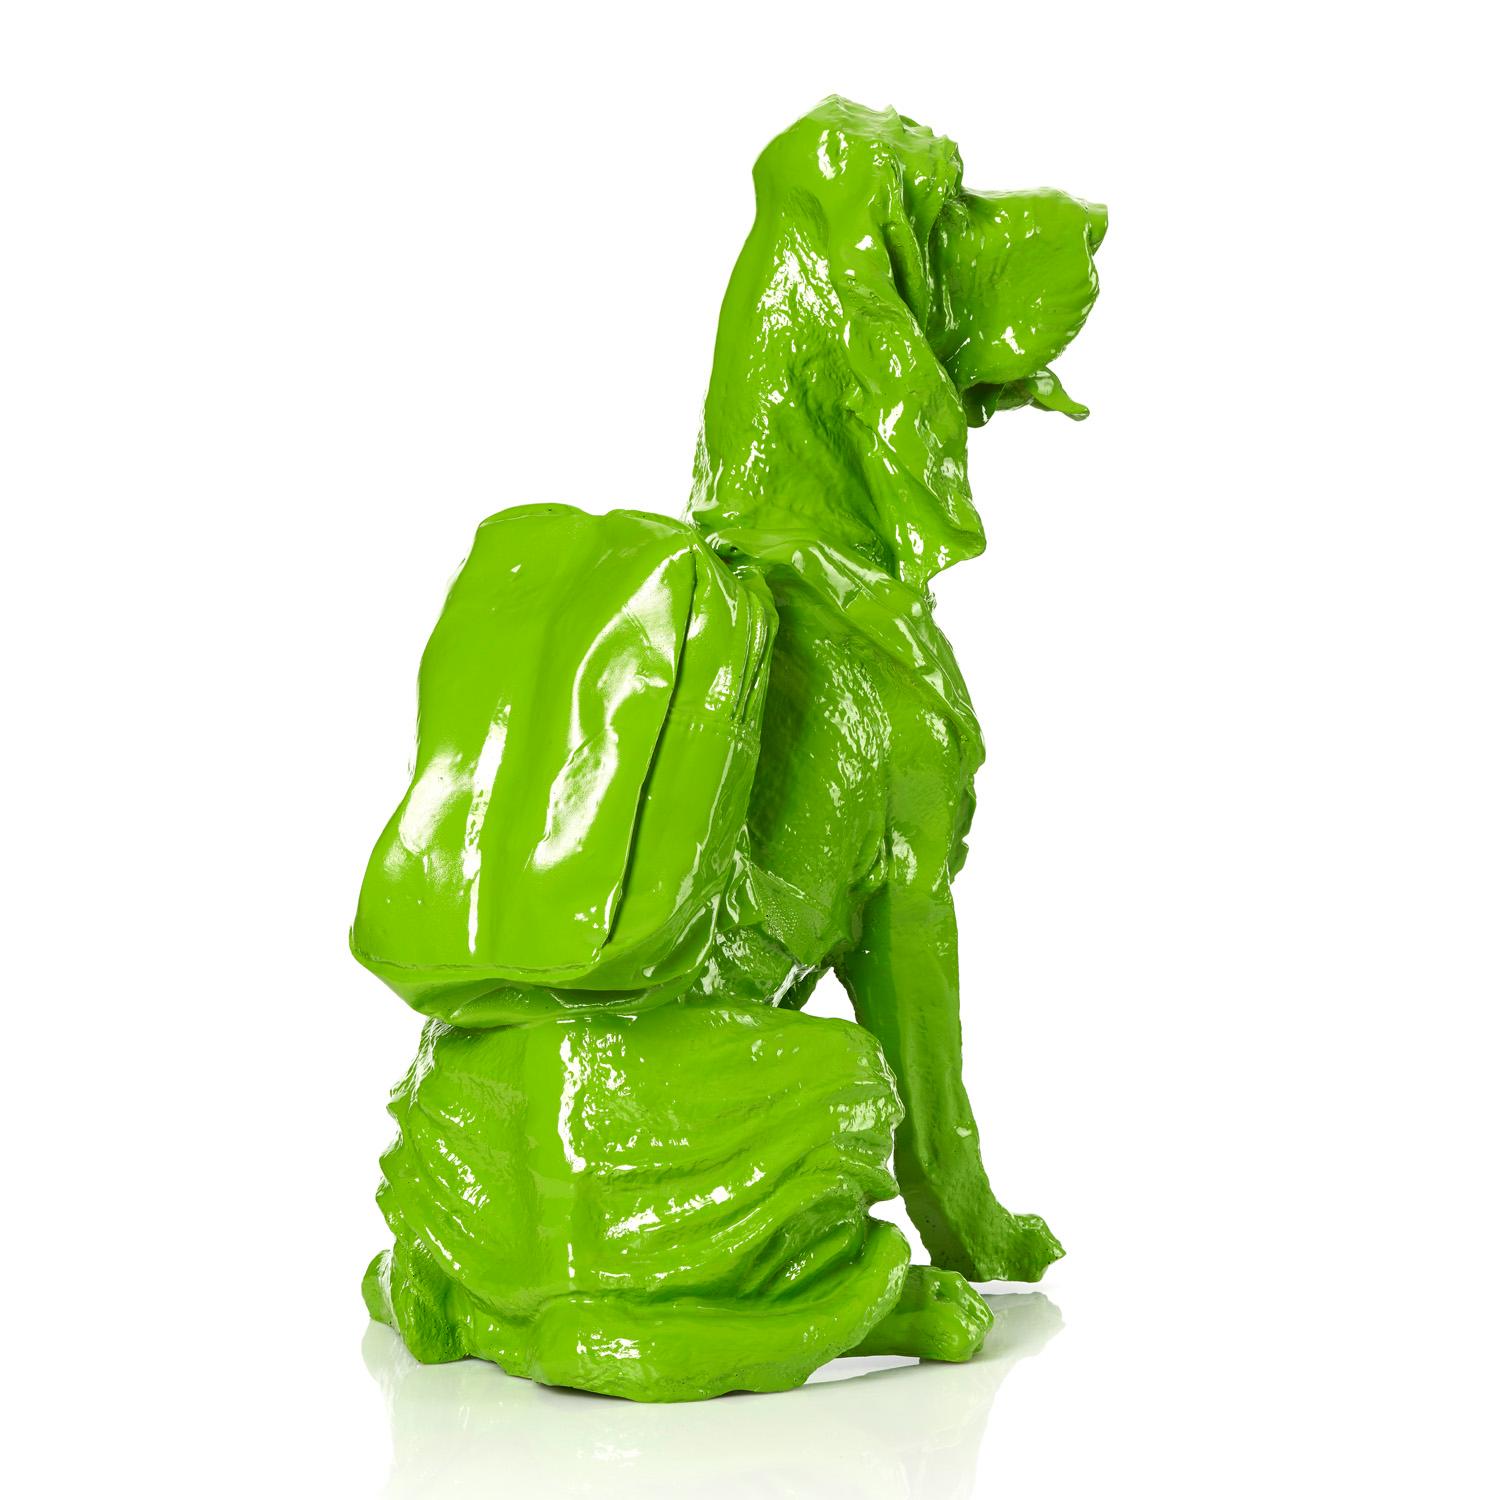 Cloned blue Bloodhound with Backpack (green) - Sculpture by William Sweetlove